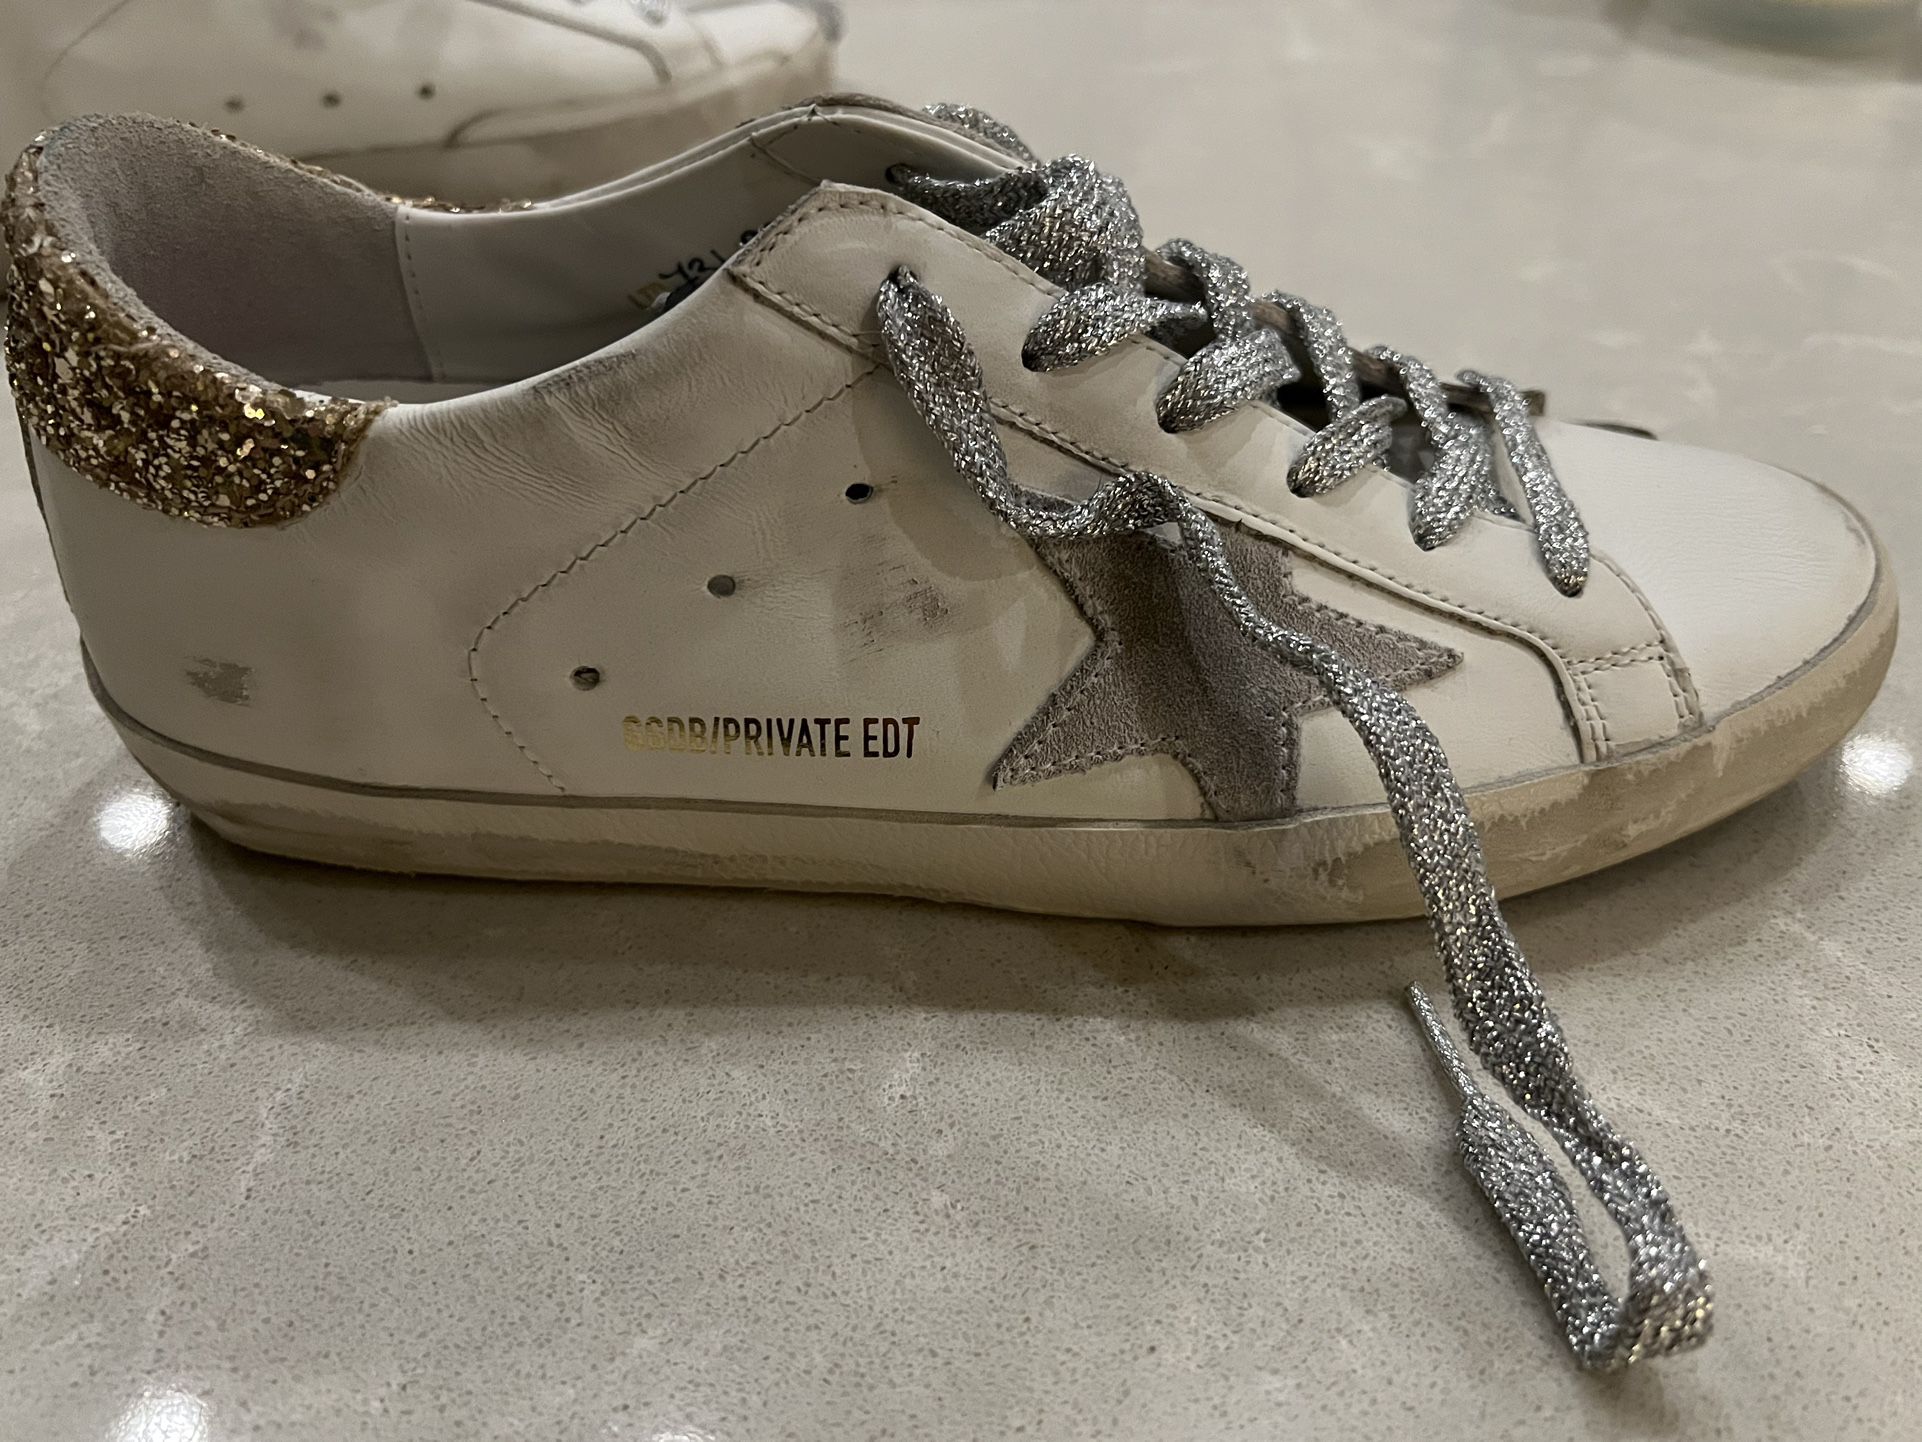 Golden Goose GGDB Private EDT Women’s Leather Sneakers